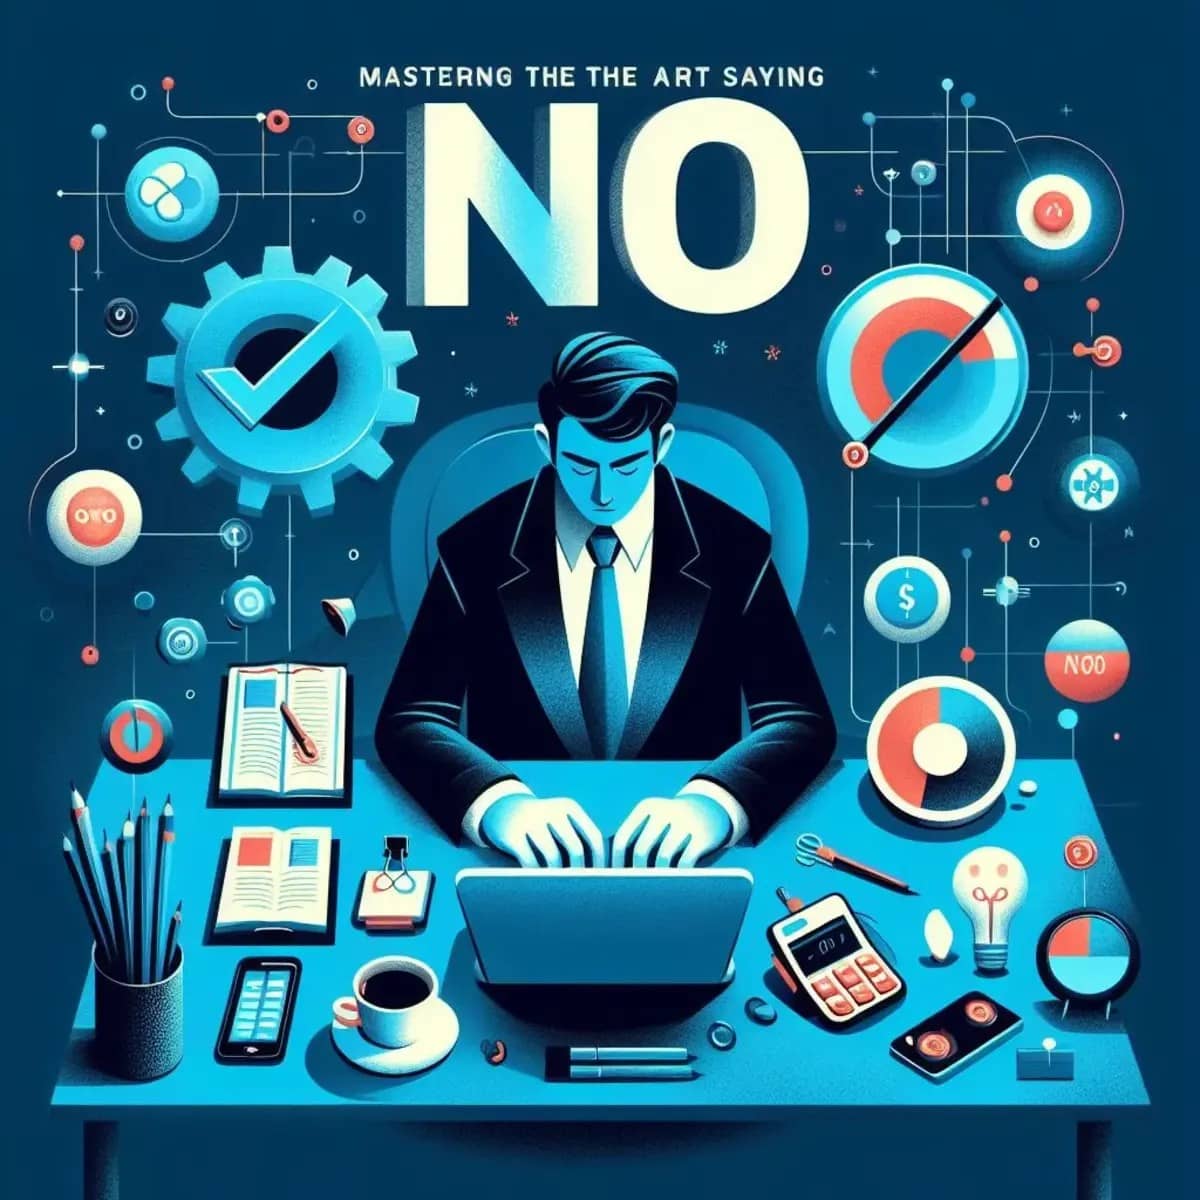 Mastering the Art of Saying No: Key Takeaways and Insights